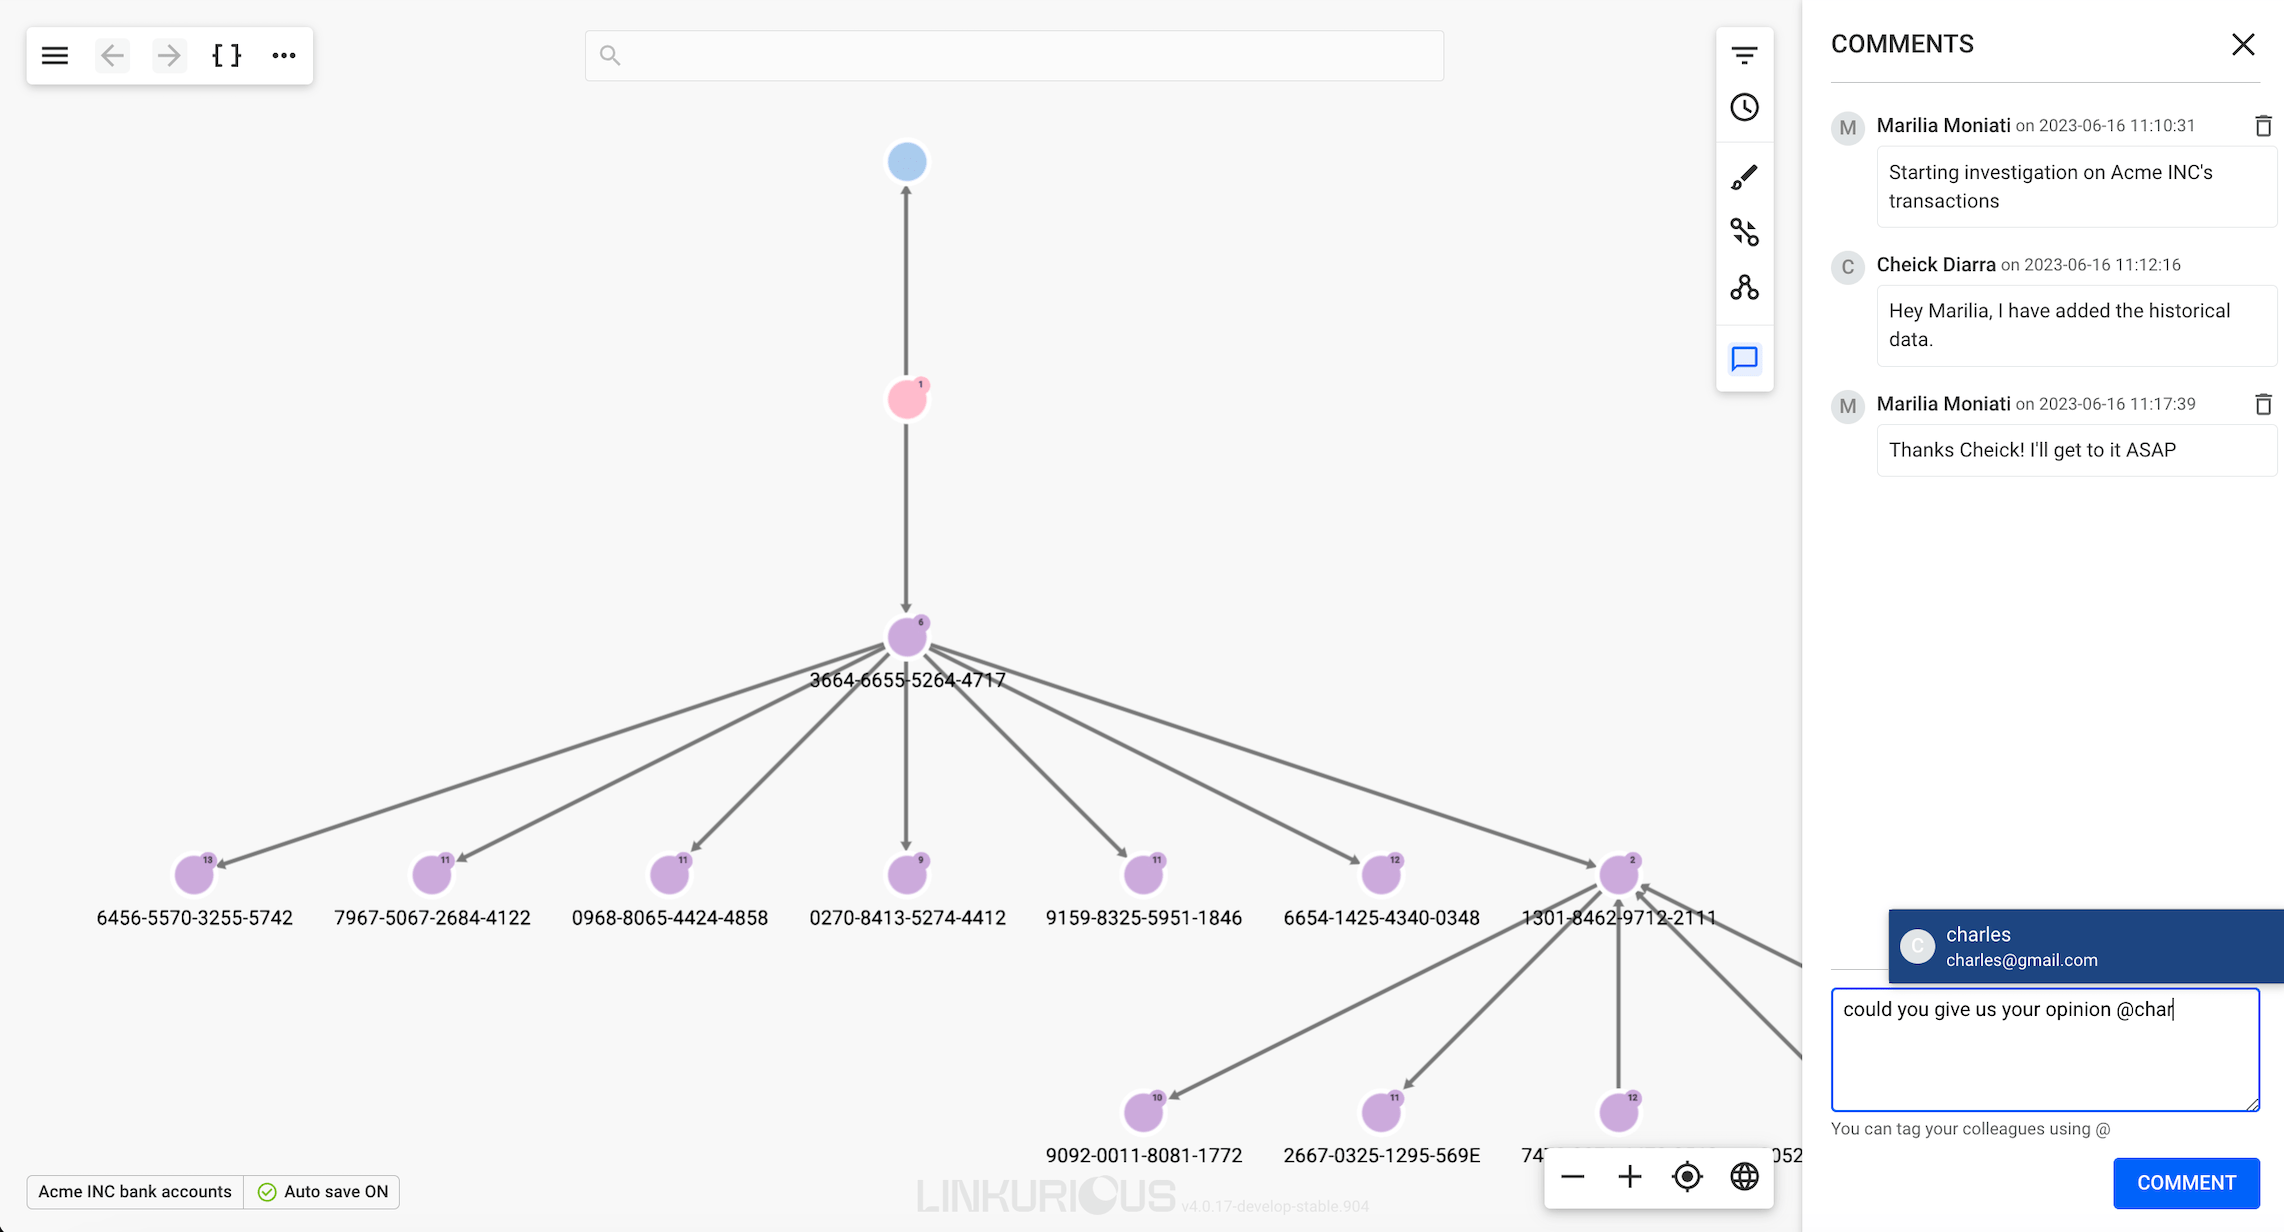 Comments and tagging with mentions in graph visualization in Linkurious Enterprise